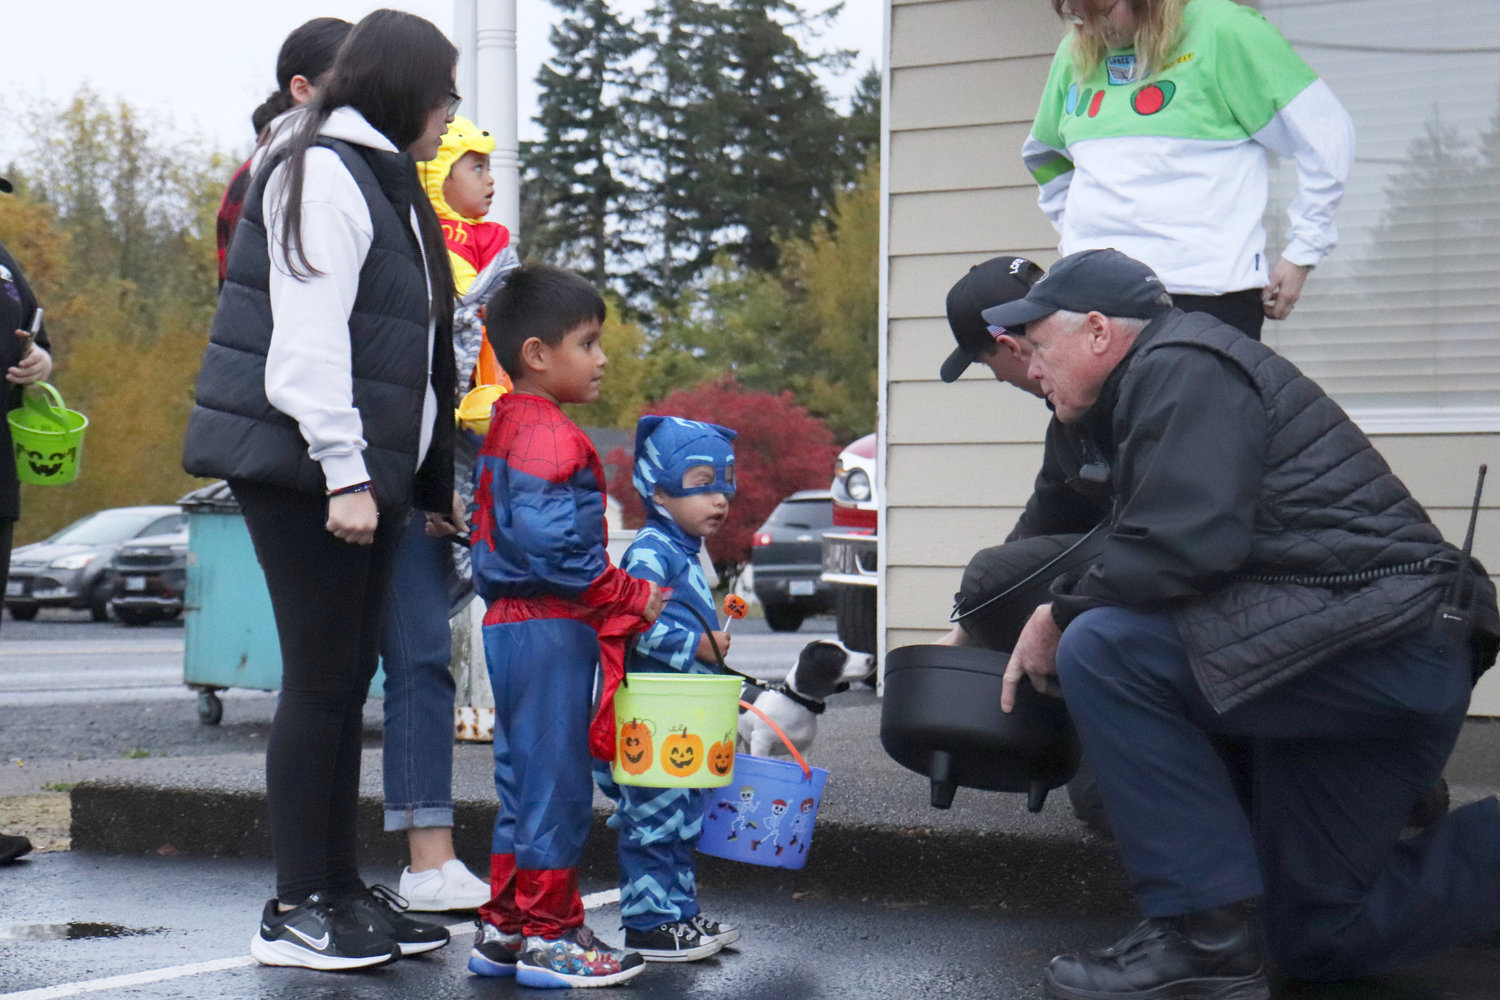 Lewis County Fire District 5 Chief Dan Mahoney kneels down to talk with trick-or-treaters during a trunk or treat event in Napavine on Monday.